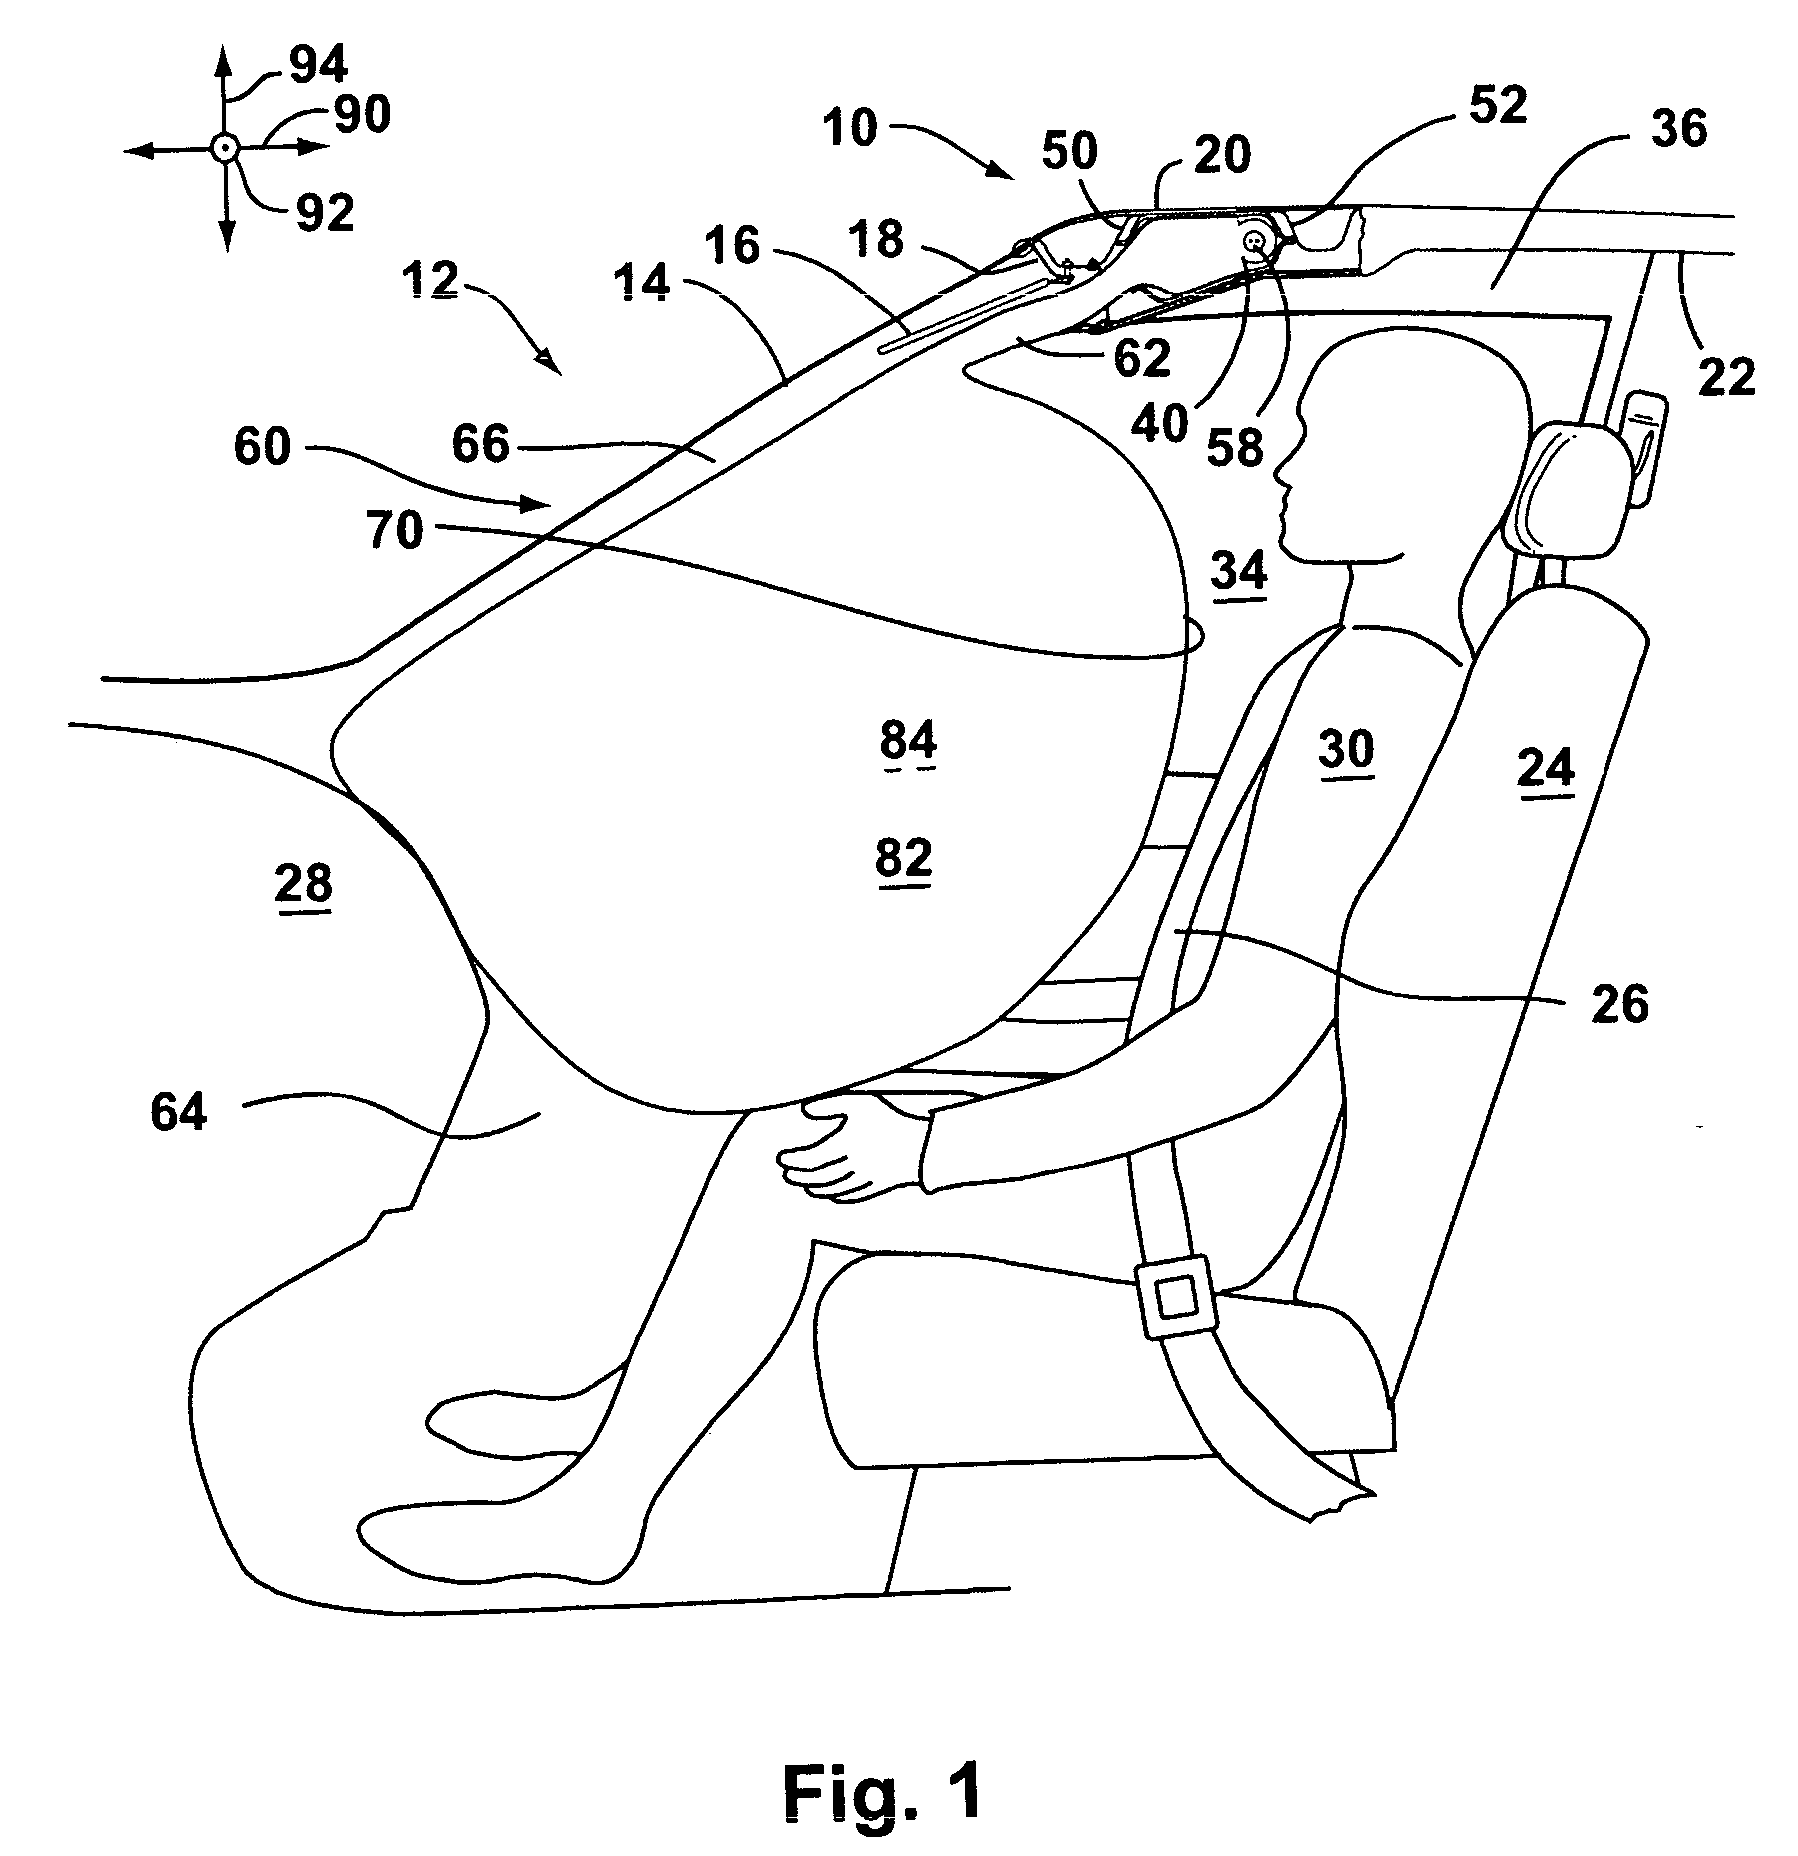 Cushion fold patterns for overhead airbags